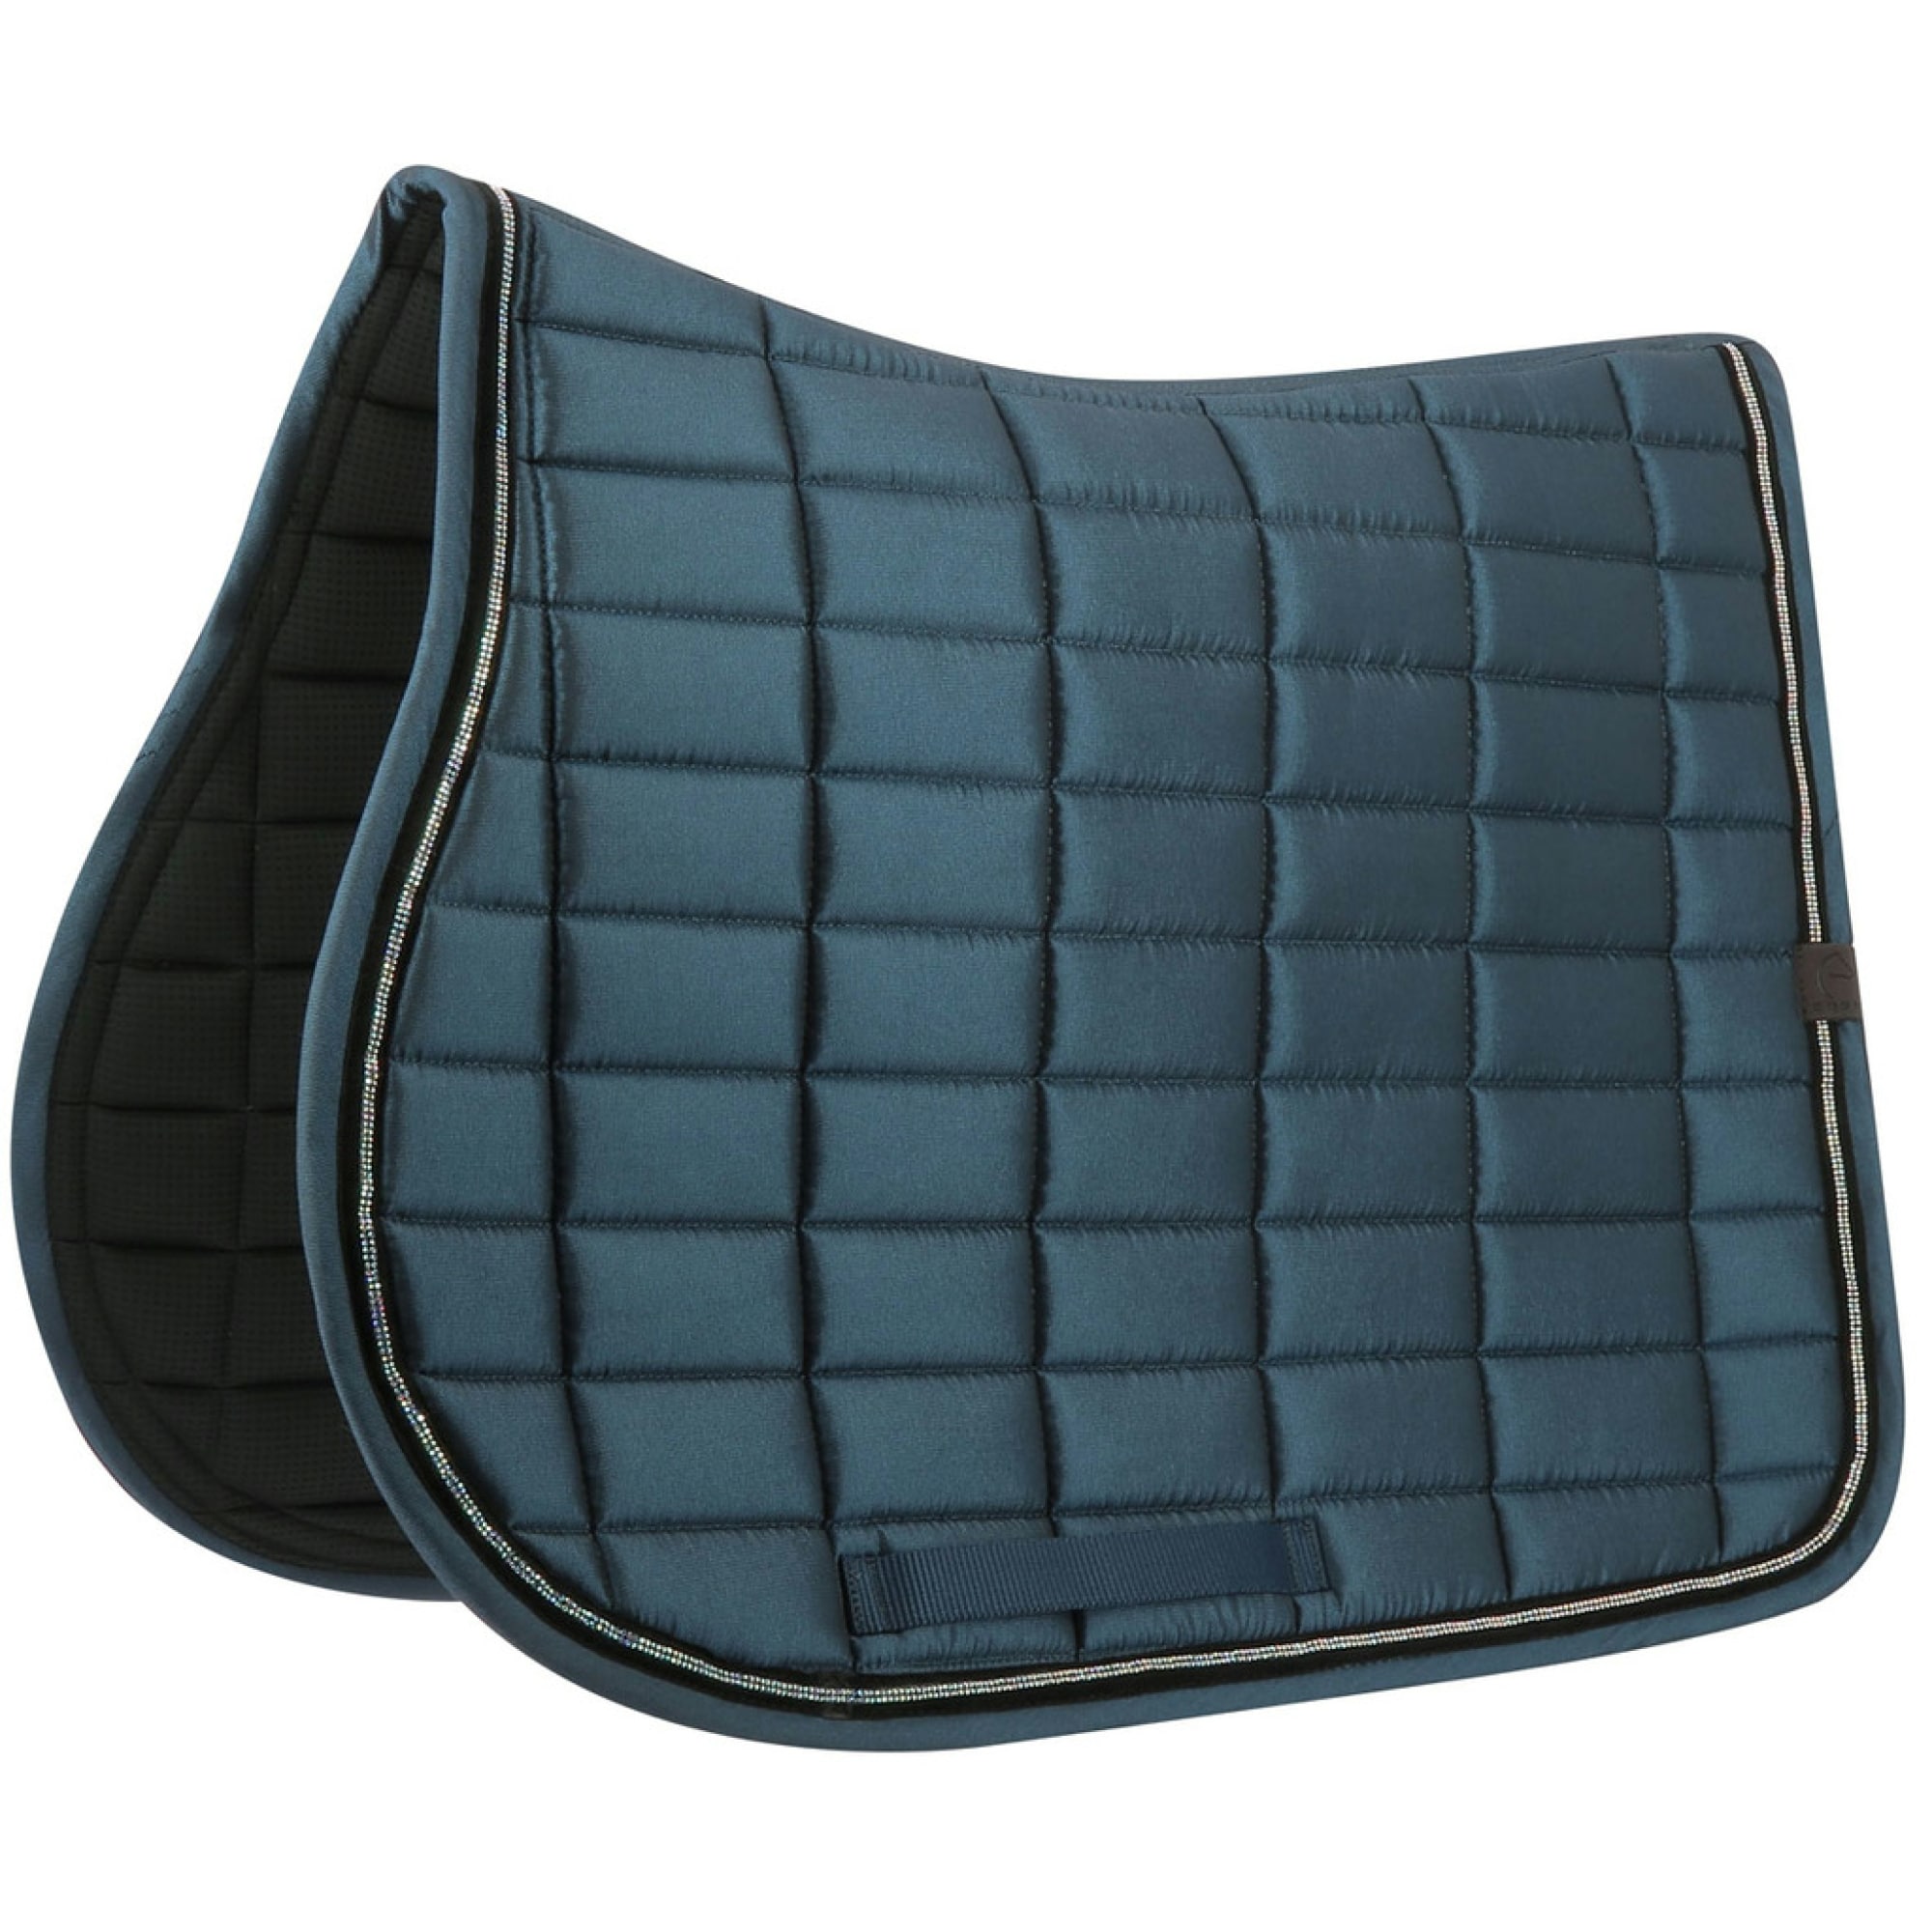 Equithème Domino Saddle Pad - All purpose